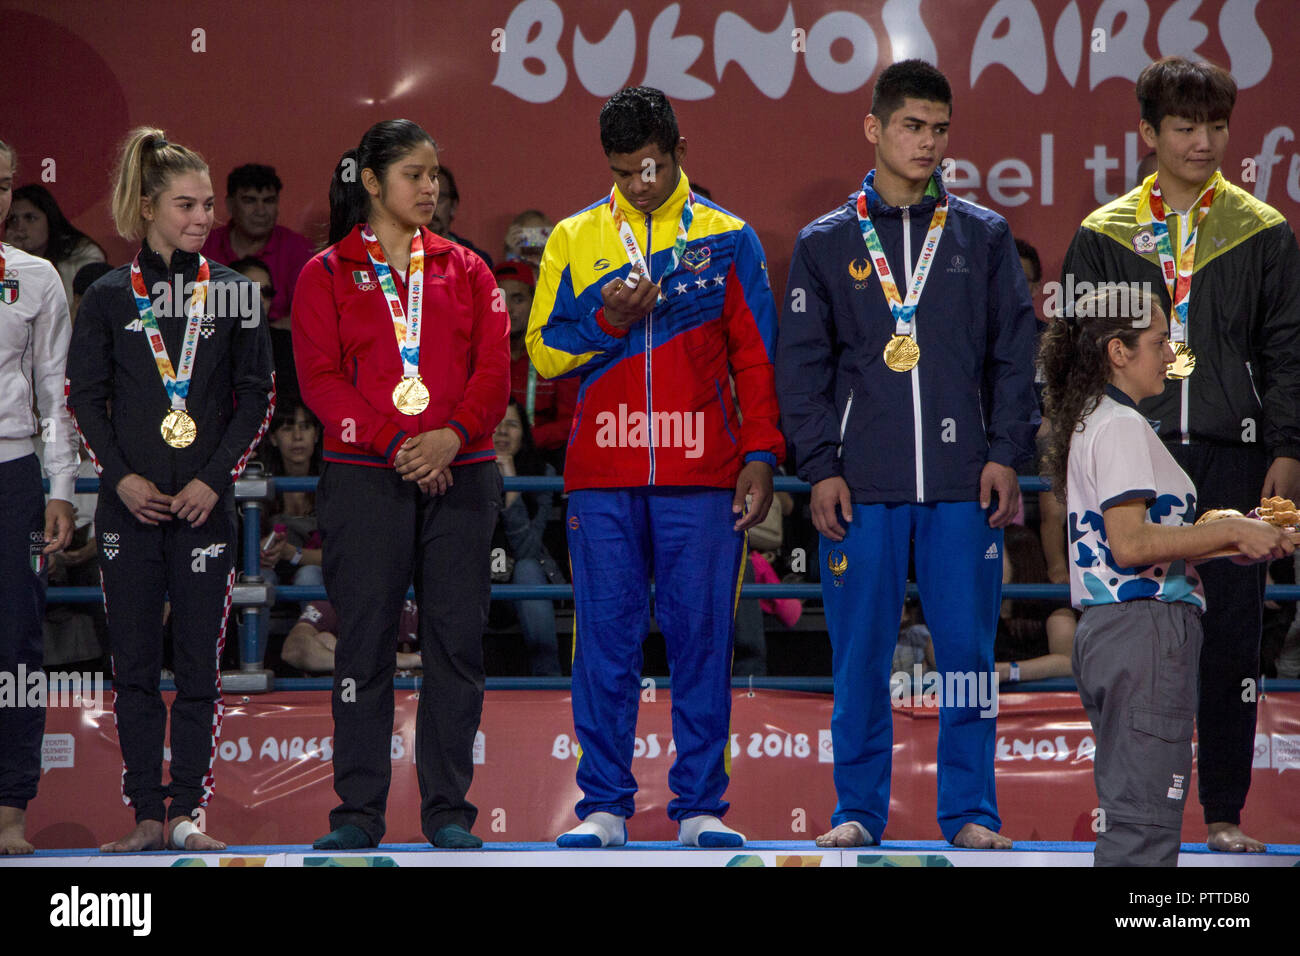 Buenos Aires, Buenos Aires, Argentina. 10th Oct, 2018. The fourth and final day of judo in Buenos Aires 2018 had mixed team competition, where boys and girls from different countries and continents competed as teams.The Beijing team consisting of Artsiom Kolasau (Belarus), Li Ling Liu (China Taipei), Jaykhunbek Nazarov (Uzbekistan), Carlos PÃ¡ez (Venezuela), Itzel Pecha (Mexico), Ana Viktorija Puljiz (Croatia) and VerÃ³nica Toniolo (Italy) were the members of the team that climbed to the top of the podium and received the gold medals on the tatami.Team competitions are promoted in the yo Stock Photo